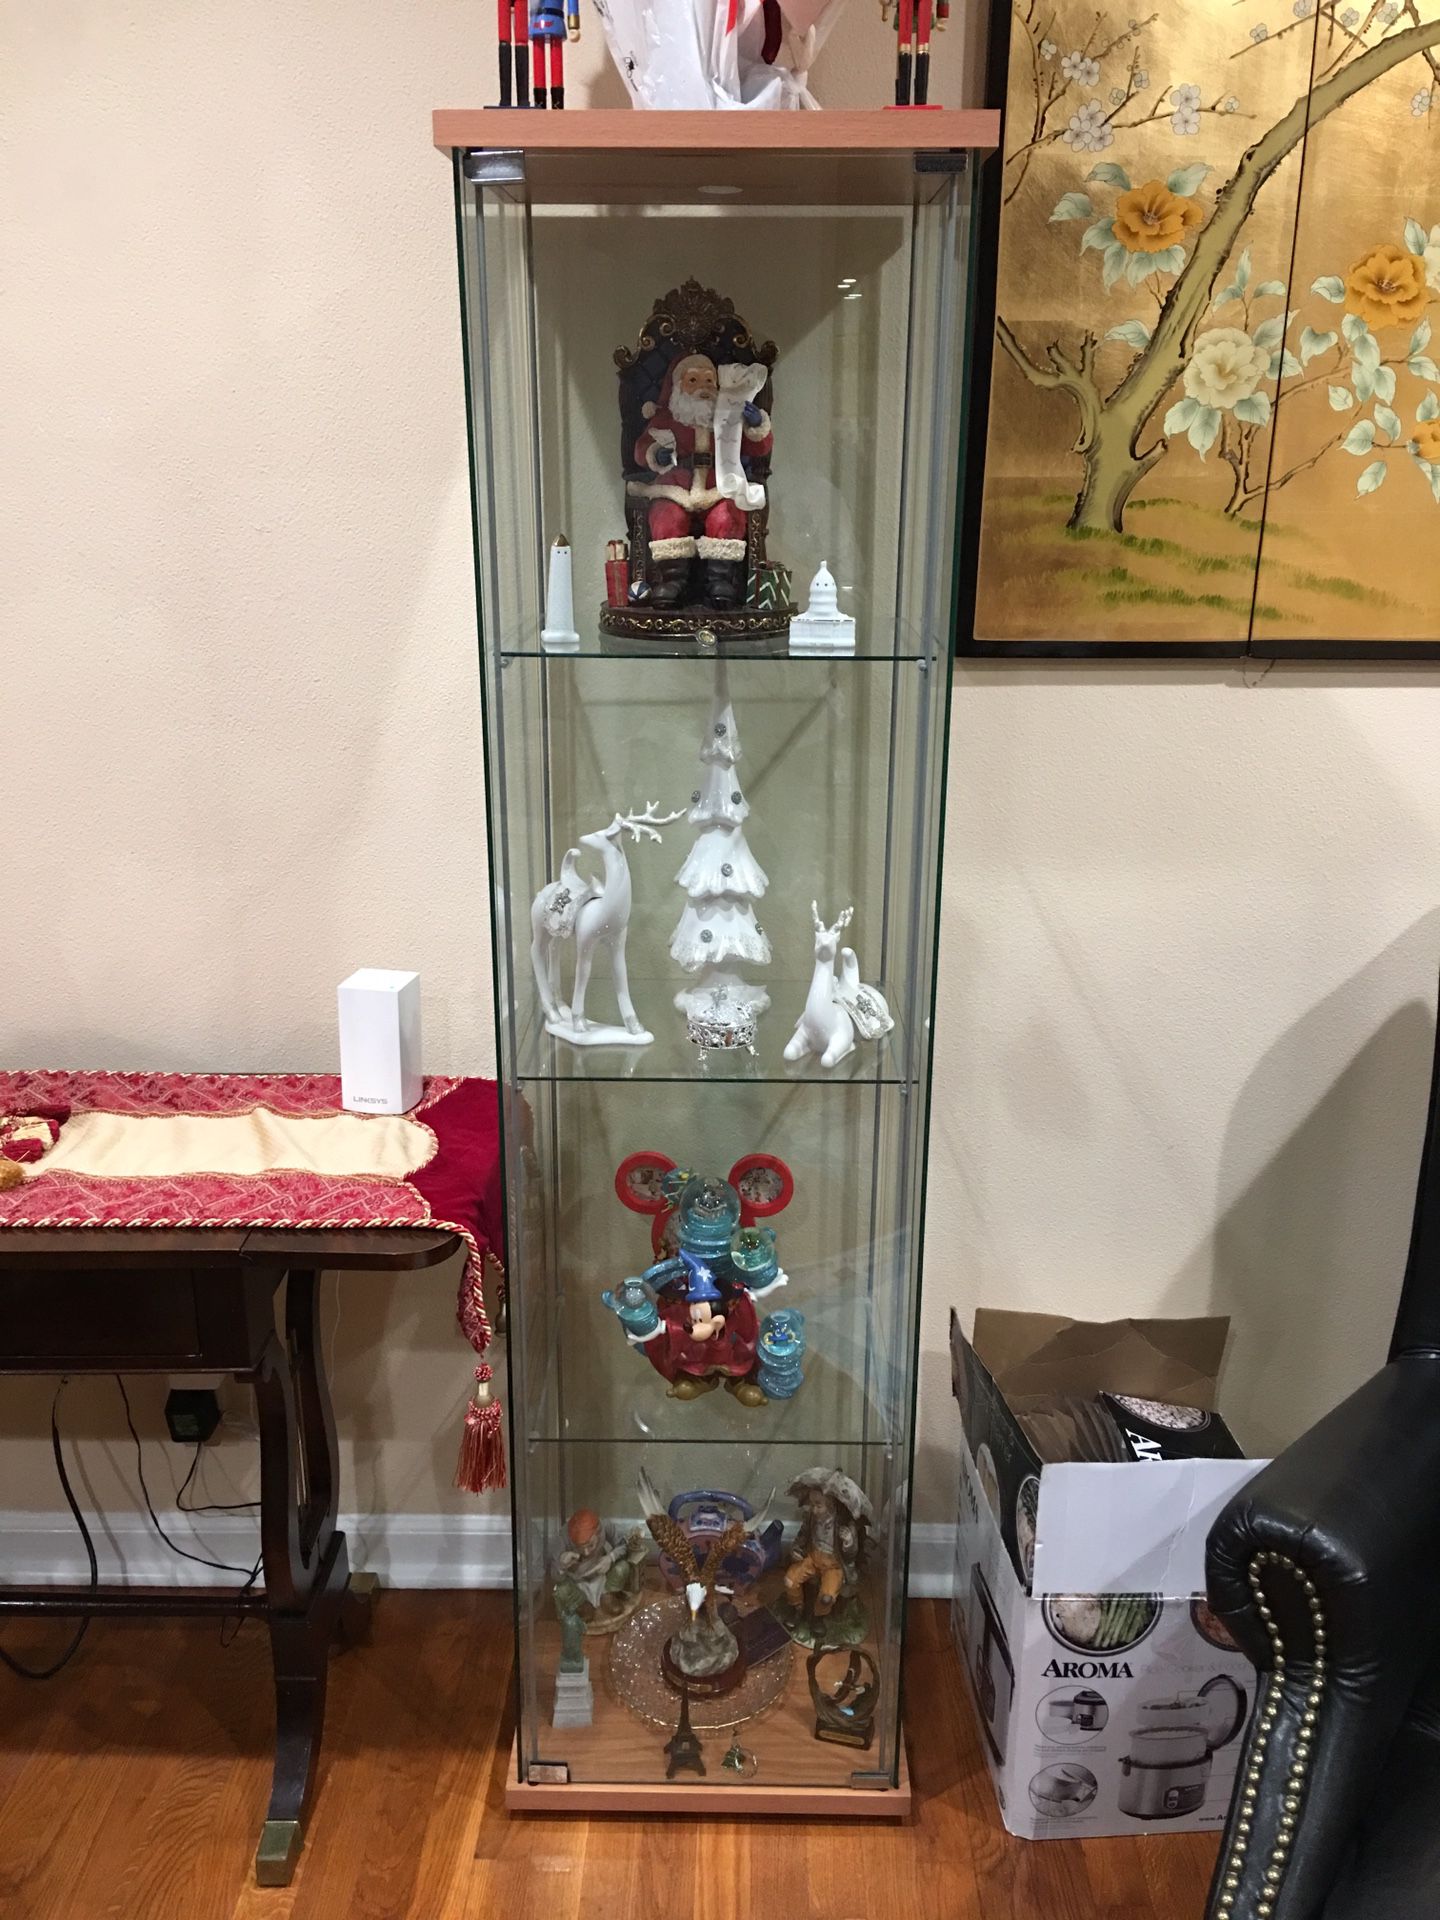 Two shelf curio this lovely cabinet brings chic display to any space. Highlight favorite family photos or share your treasured